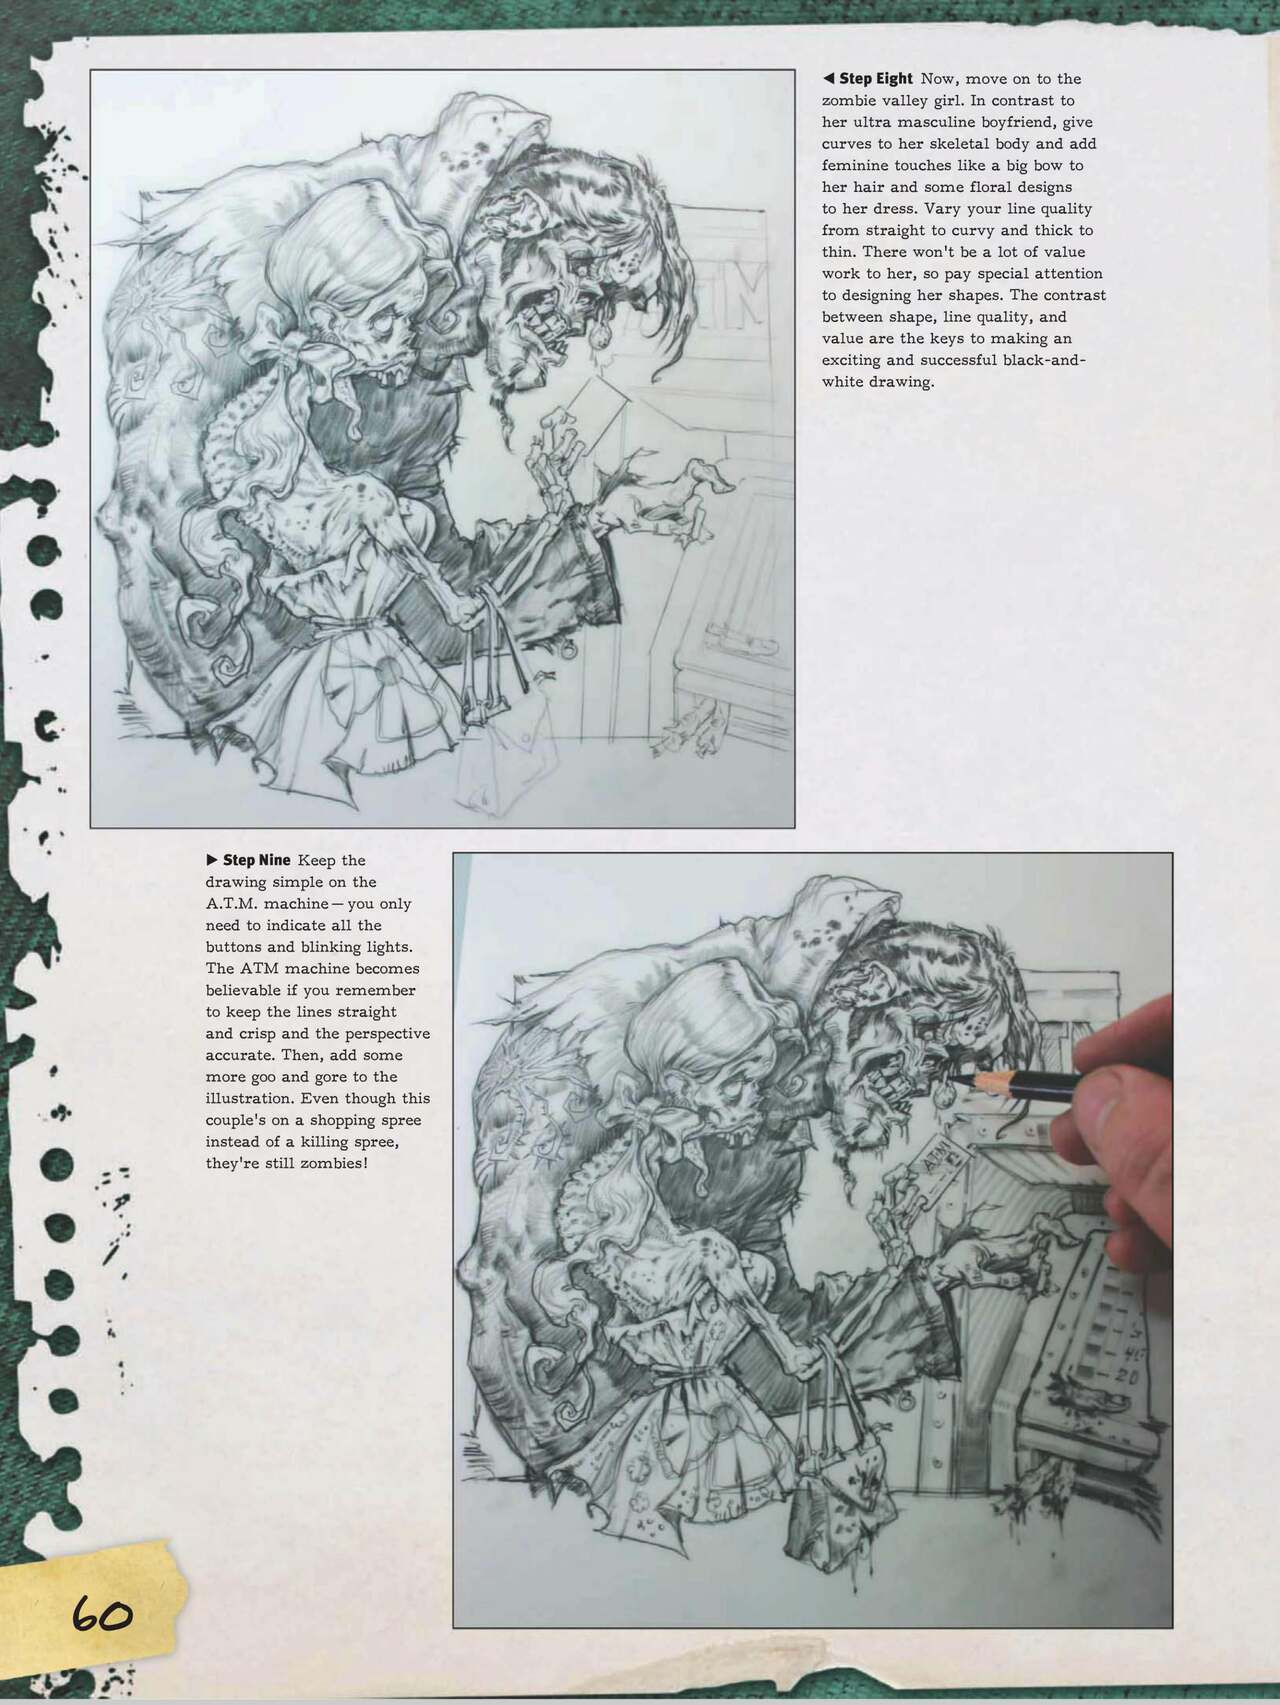 How to Draw Zombies: Discover the secrets to drawing, painting, and illustrating the undead 僵尸描绘集 61